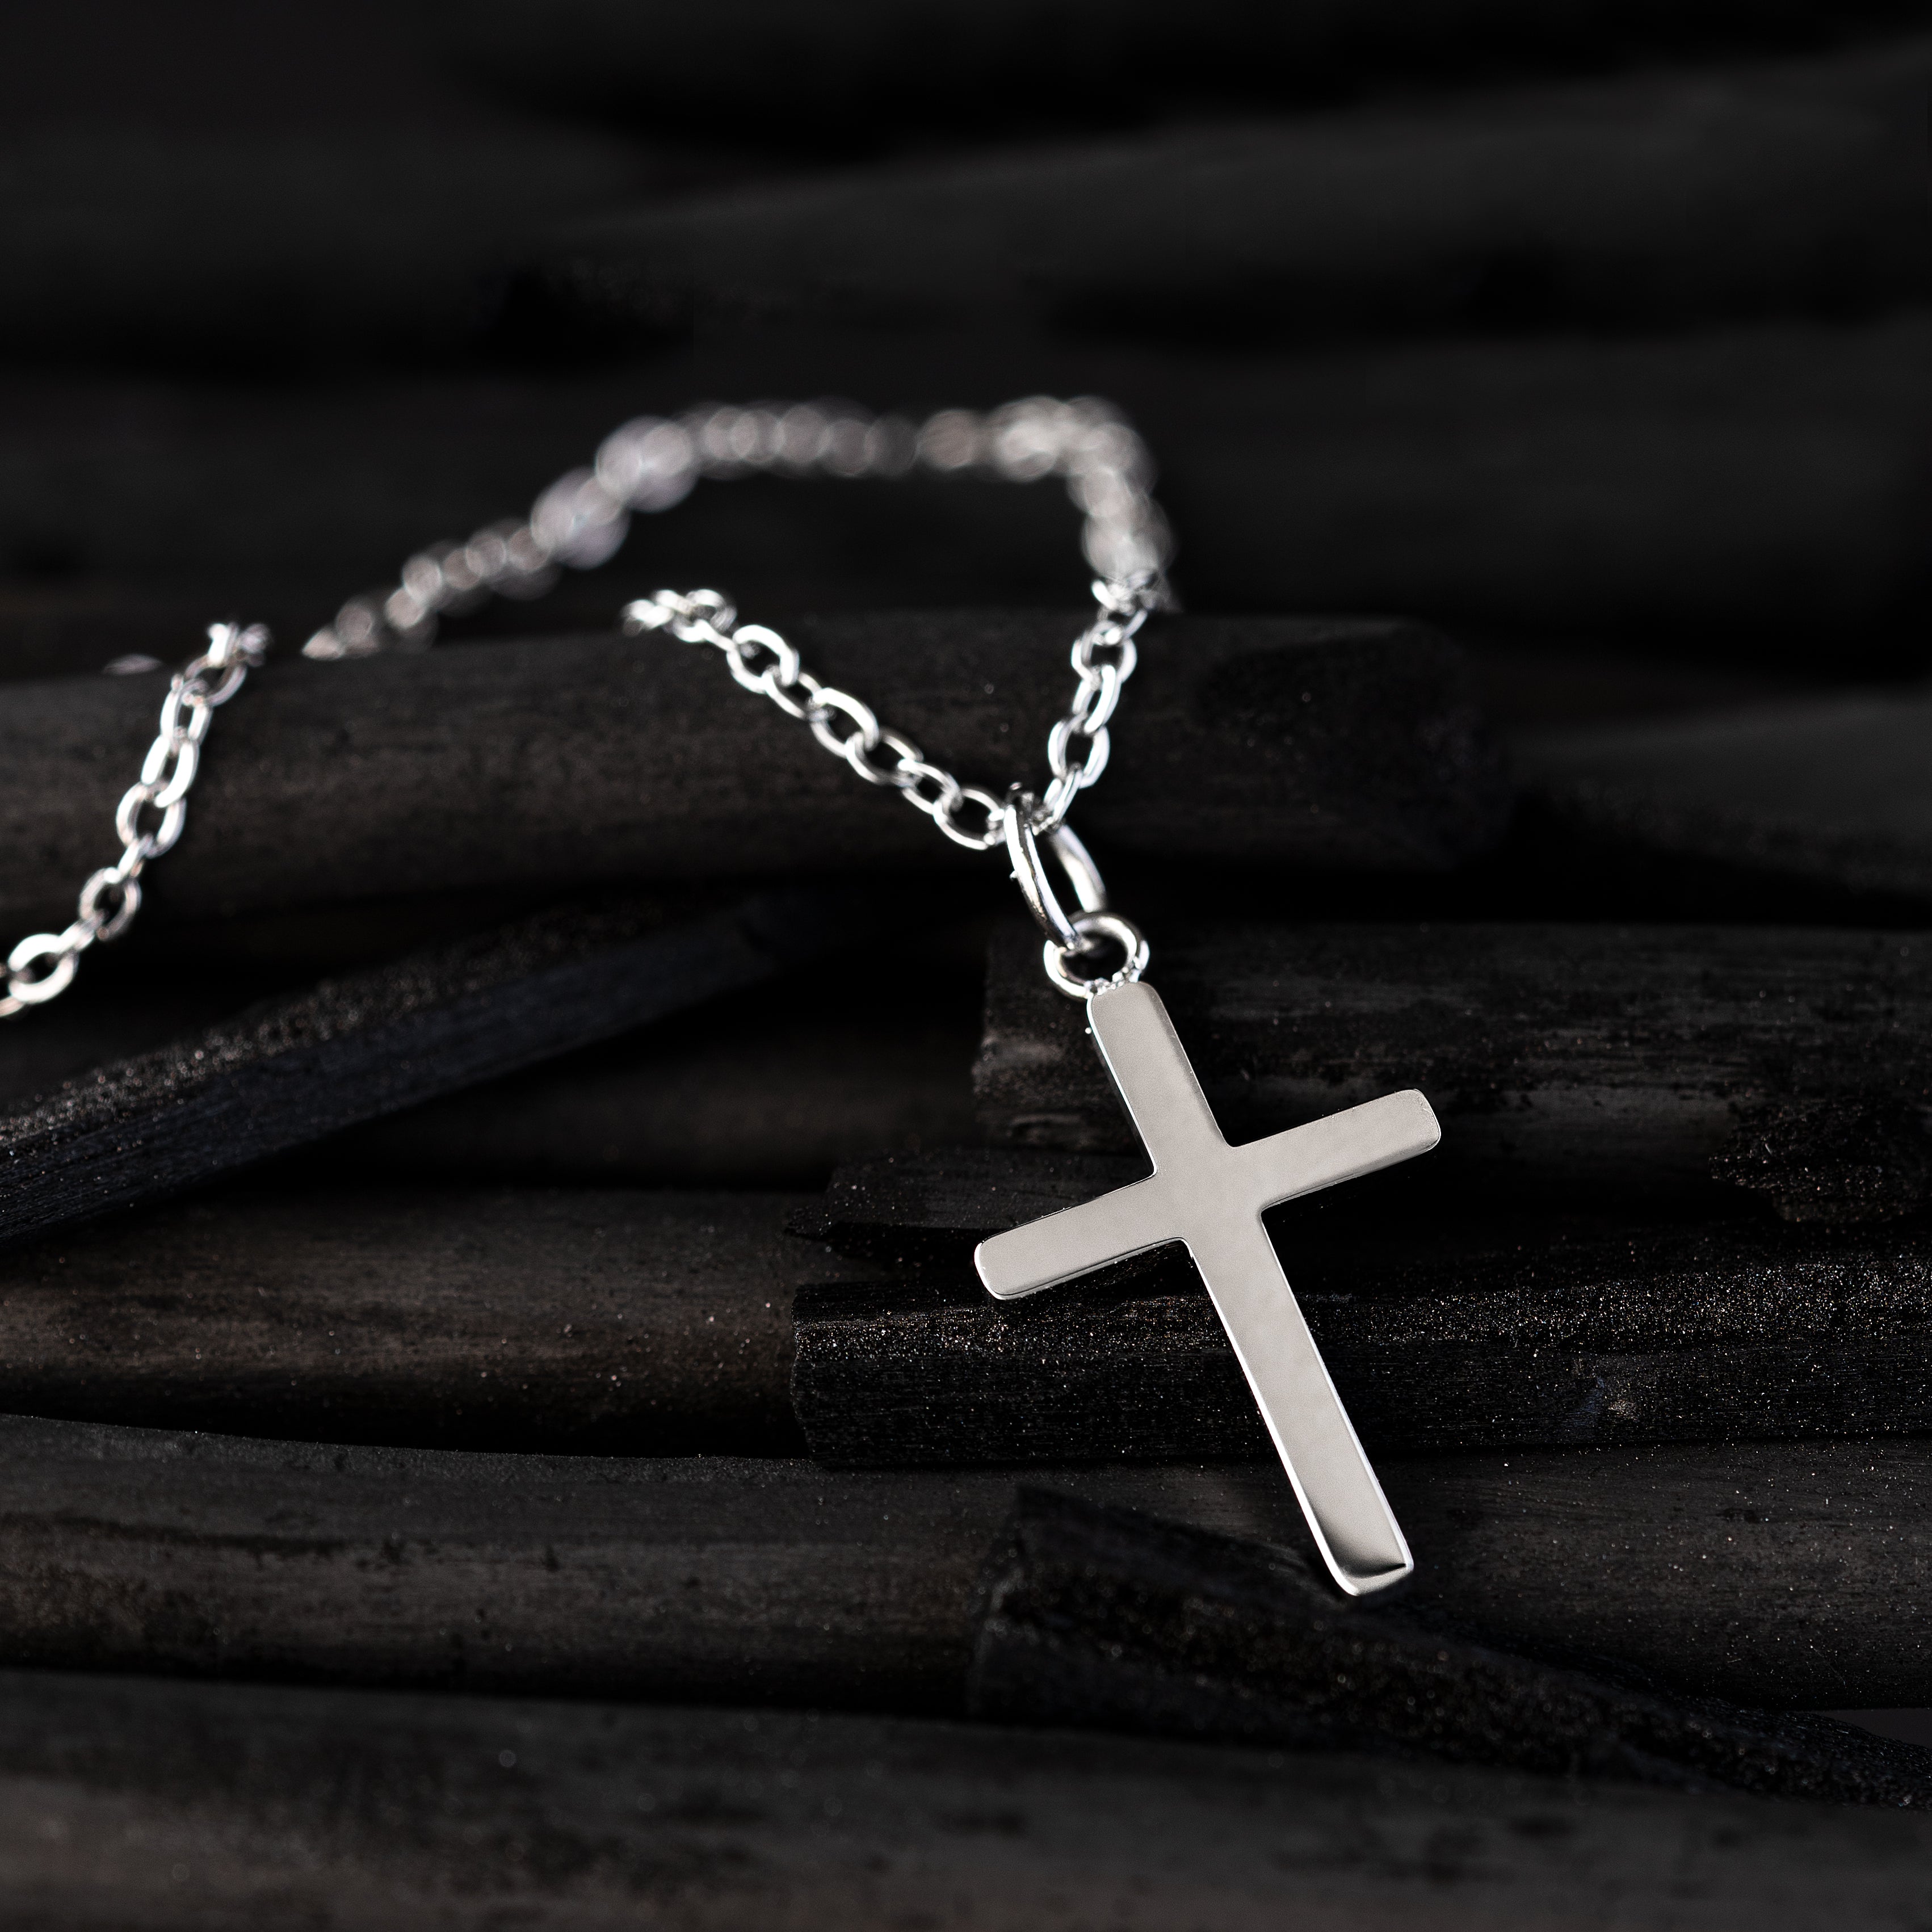 Silver cross chain on black background.